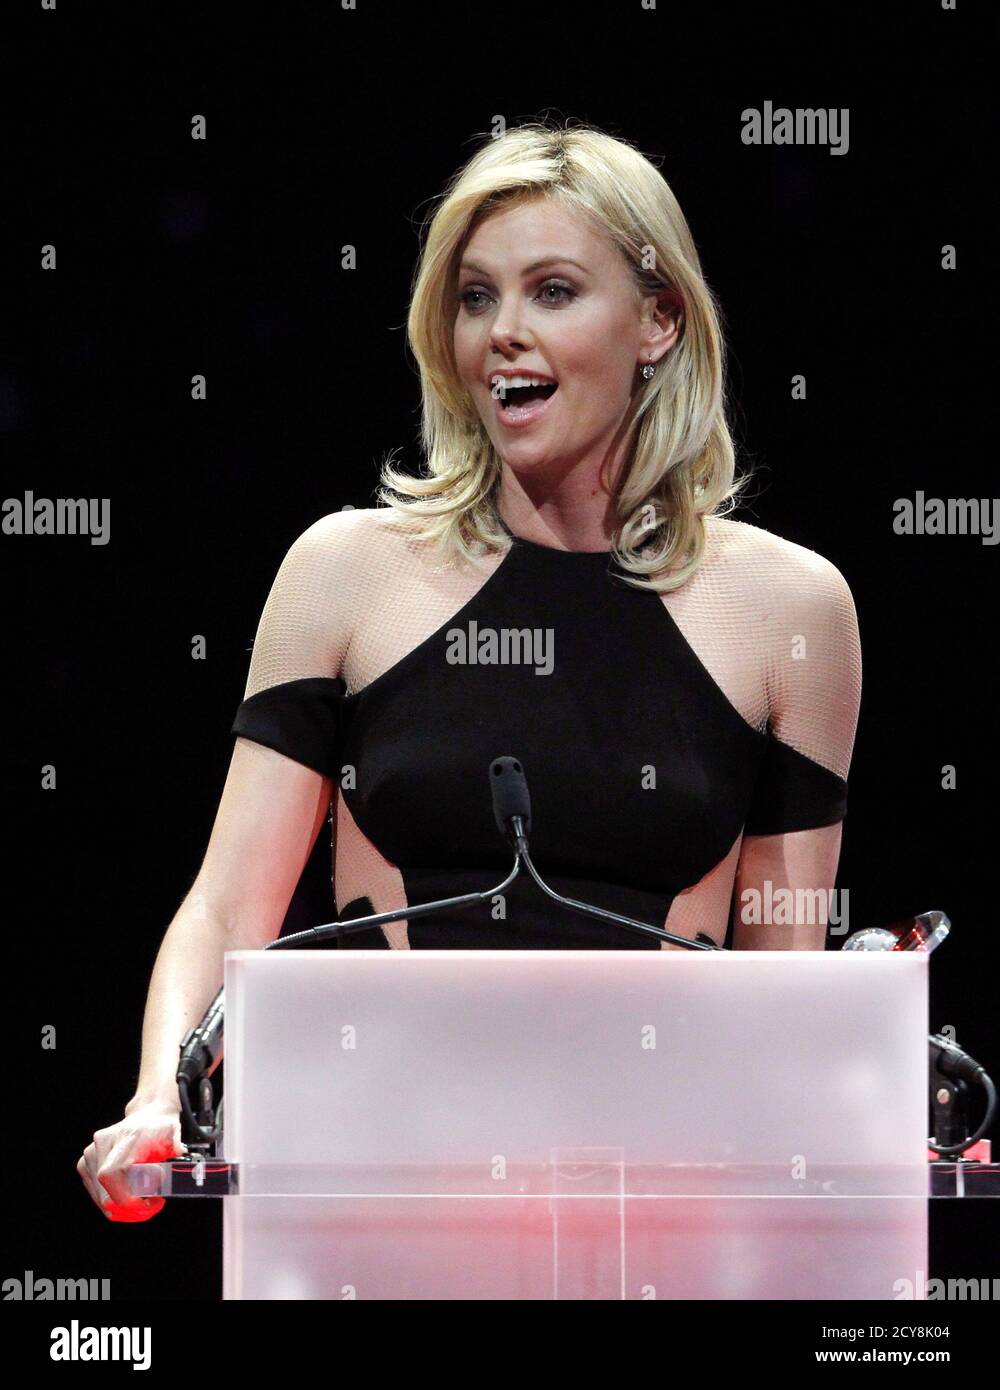 Actress Charlize Theron accepts the Distinguished Decade of Achievement in Film Award during the CinemaCon Big Screen Achievement Awards show at Caesars Palace in Las Vegas, Nevada, April 26, 2012. CinemaCon is the official convention for the National Association of Theatre Owners (NATO).  REUTERS/Steve Marcus (UNITED STATES - Tags: ENTERTAINMENT) Stock Photo